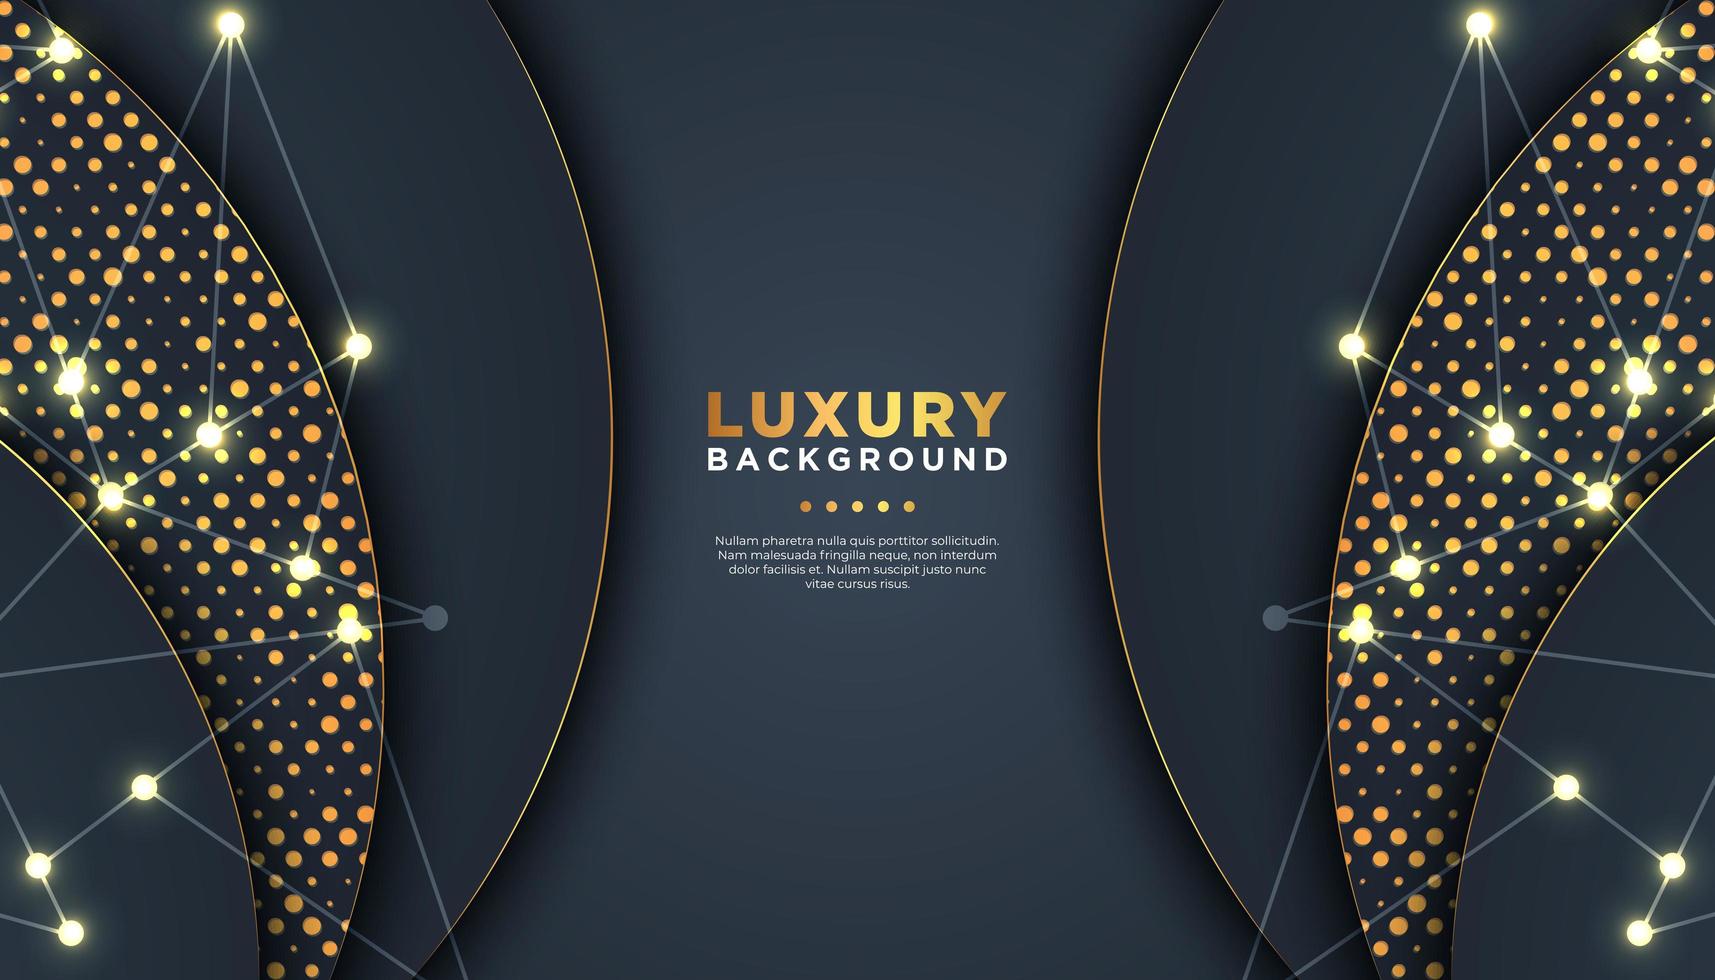 Dark Curved Layers with Gold Dots Background   vector